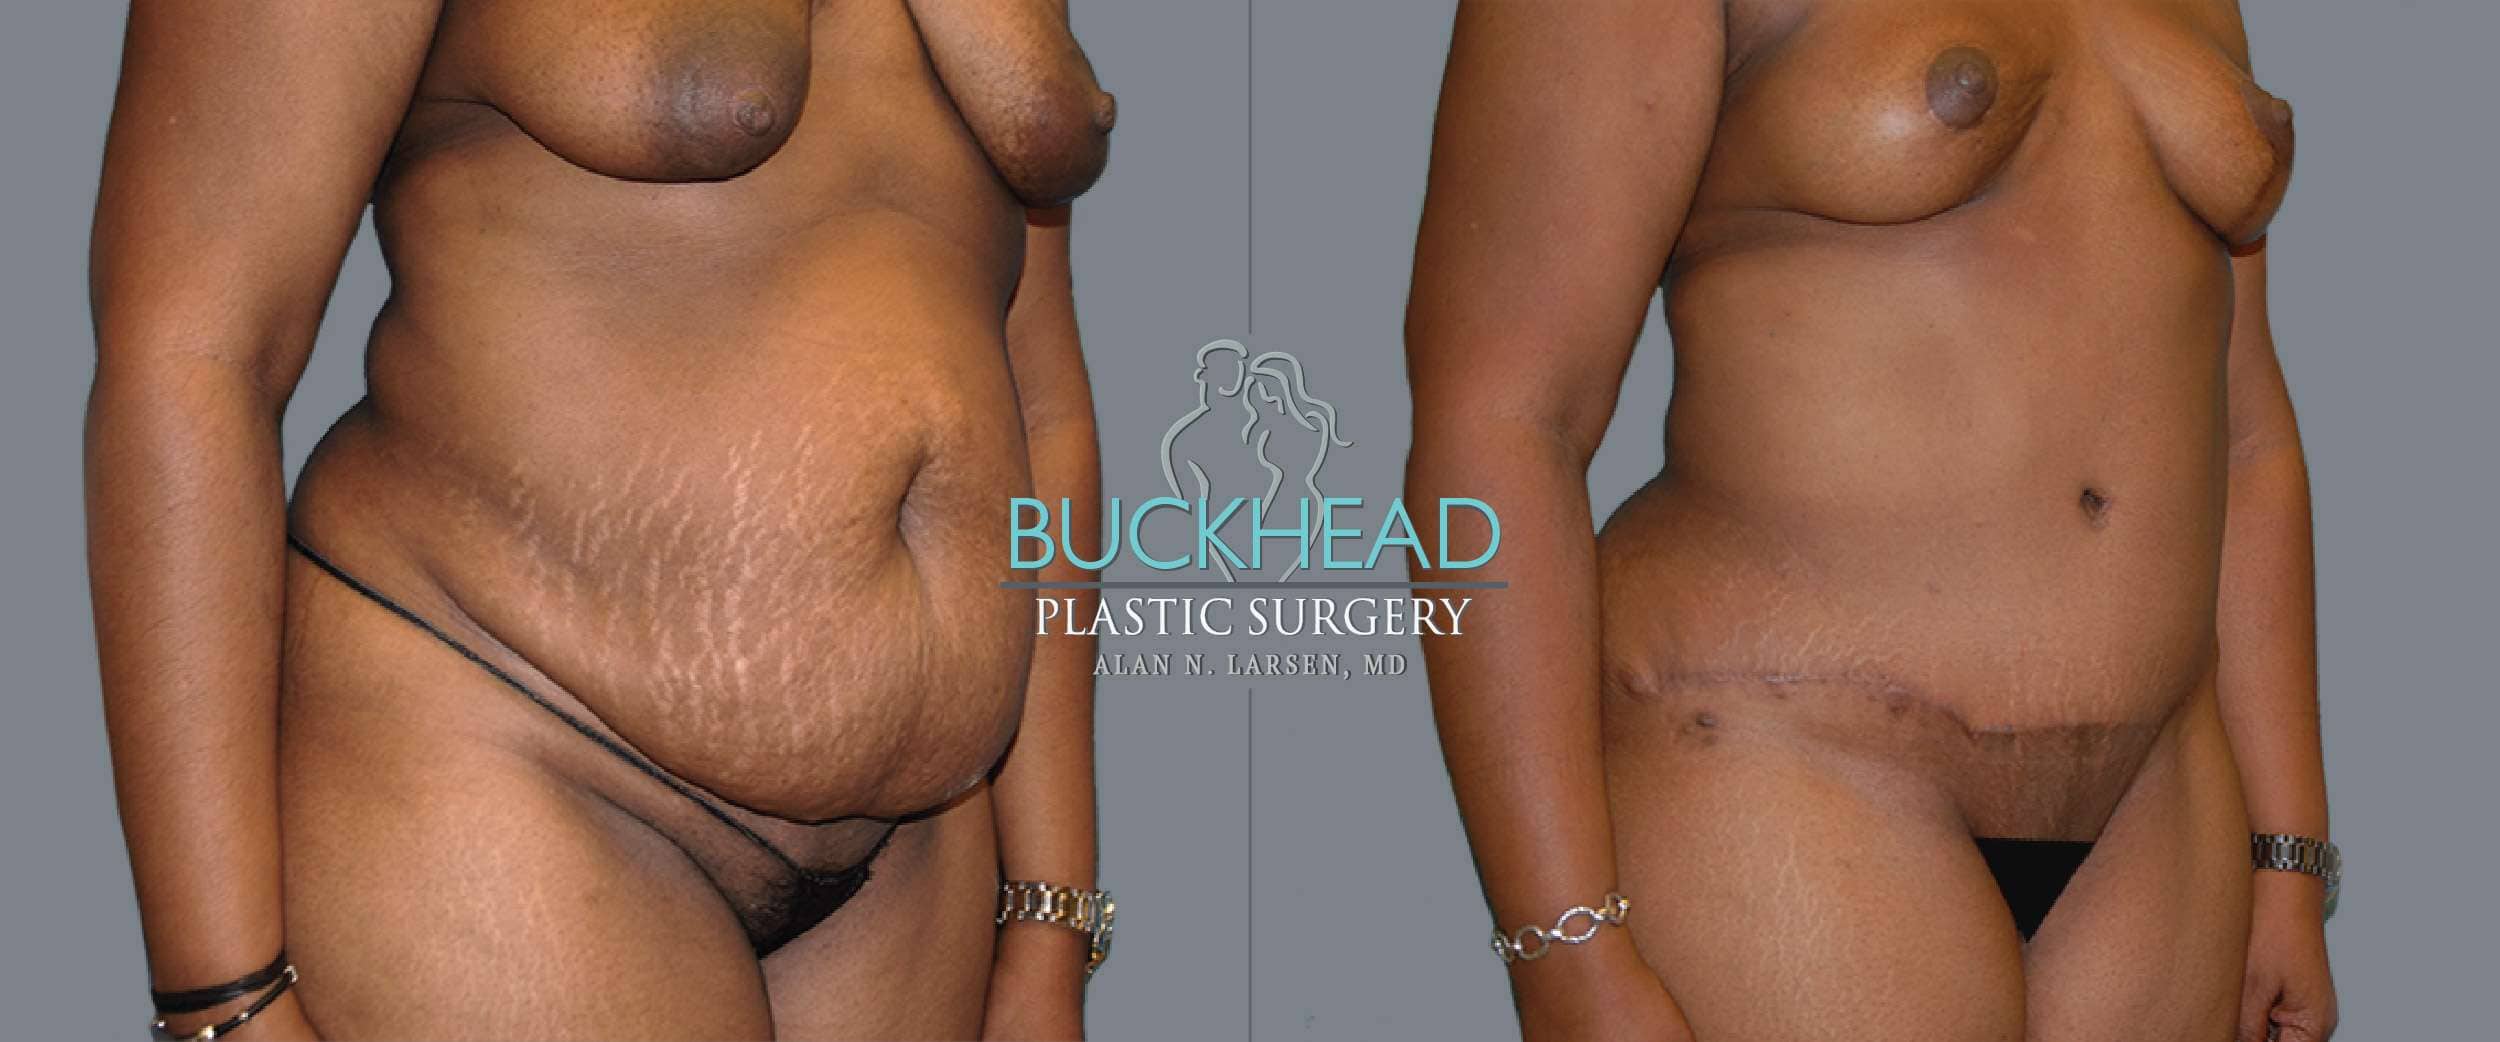 Before and After Photo gallery | Tummy Tuck | Buckhead Plastic Surgery | Double Board-Certified Plastic Surgeon in Atlanta GA